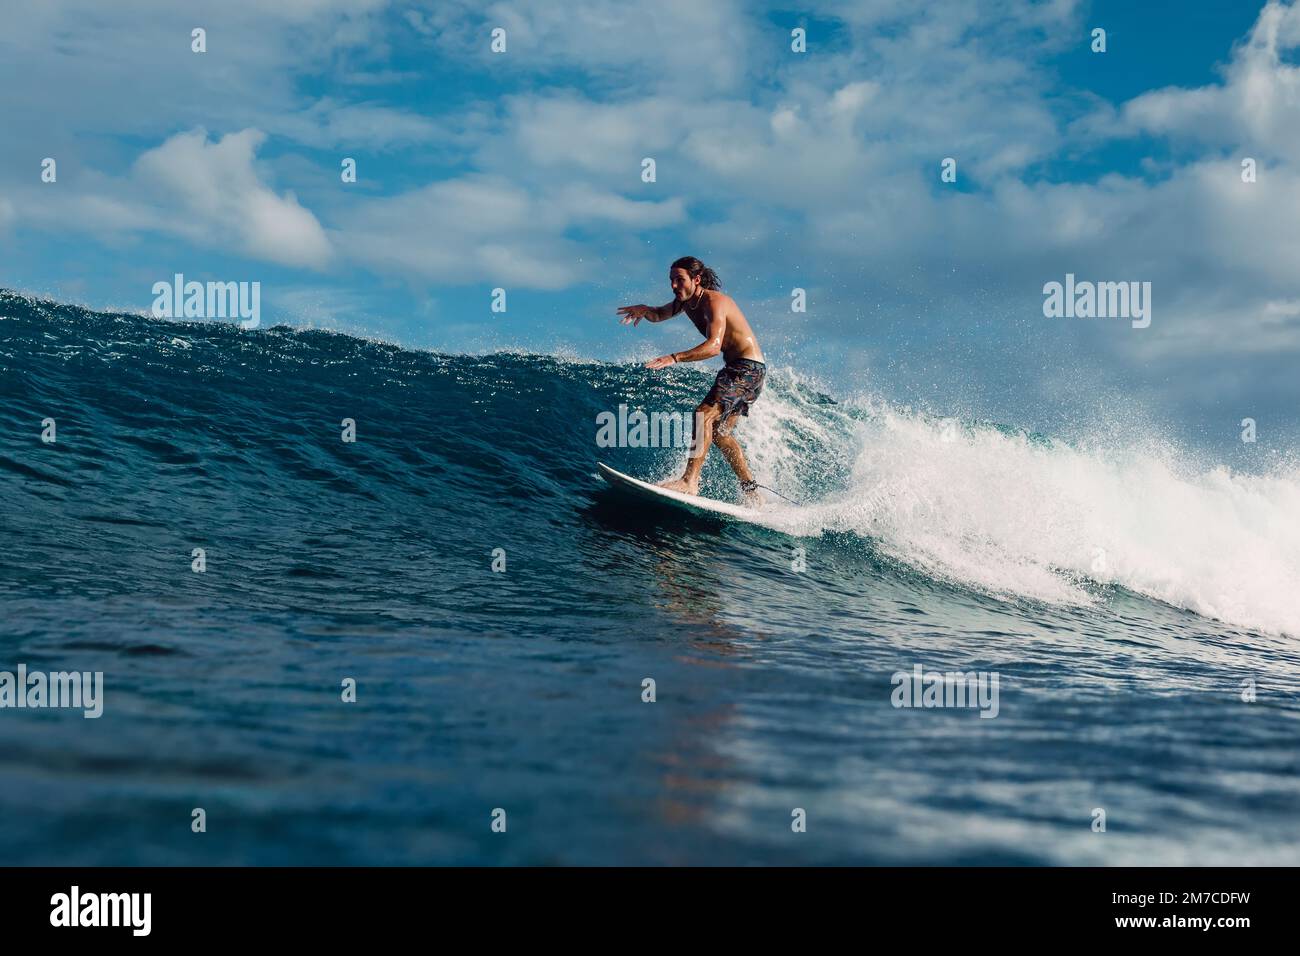 January 4, 2023. Bali, Indonesia. Man in tropical ocean during surfing.  Surfer ride on surfboard on blue wave Stock Photo - Alamy